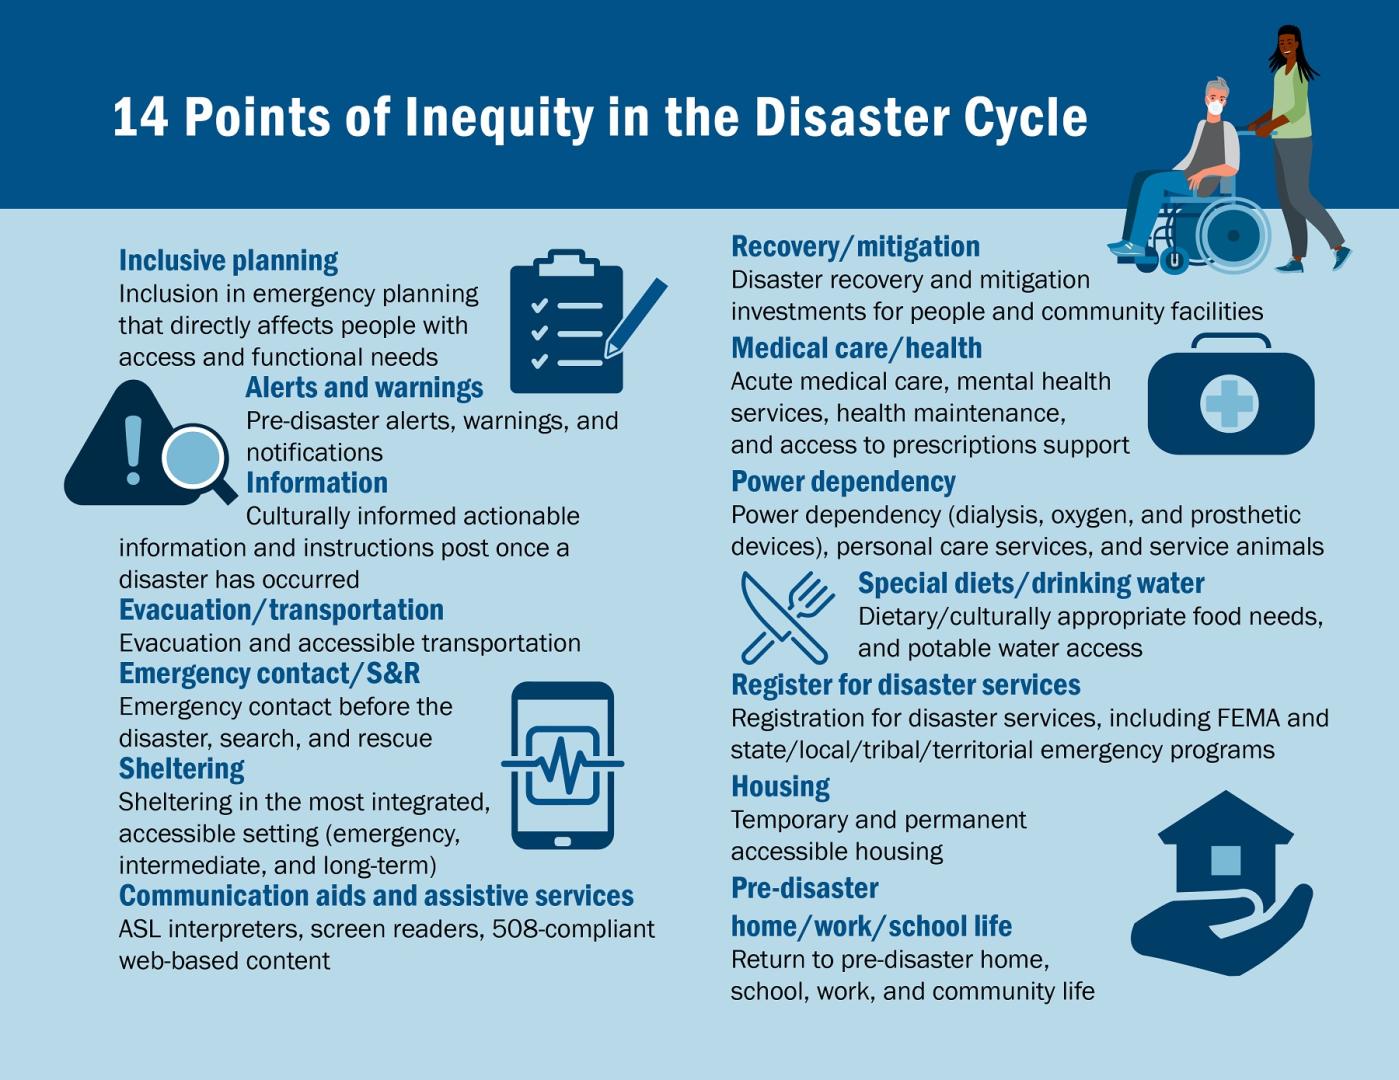 An infographic showing the 14 points of inequity during a disaster and recovery.